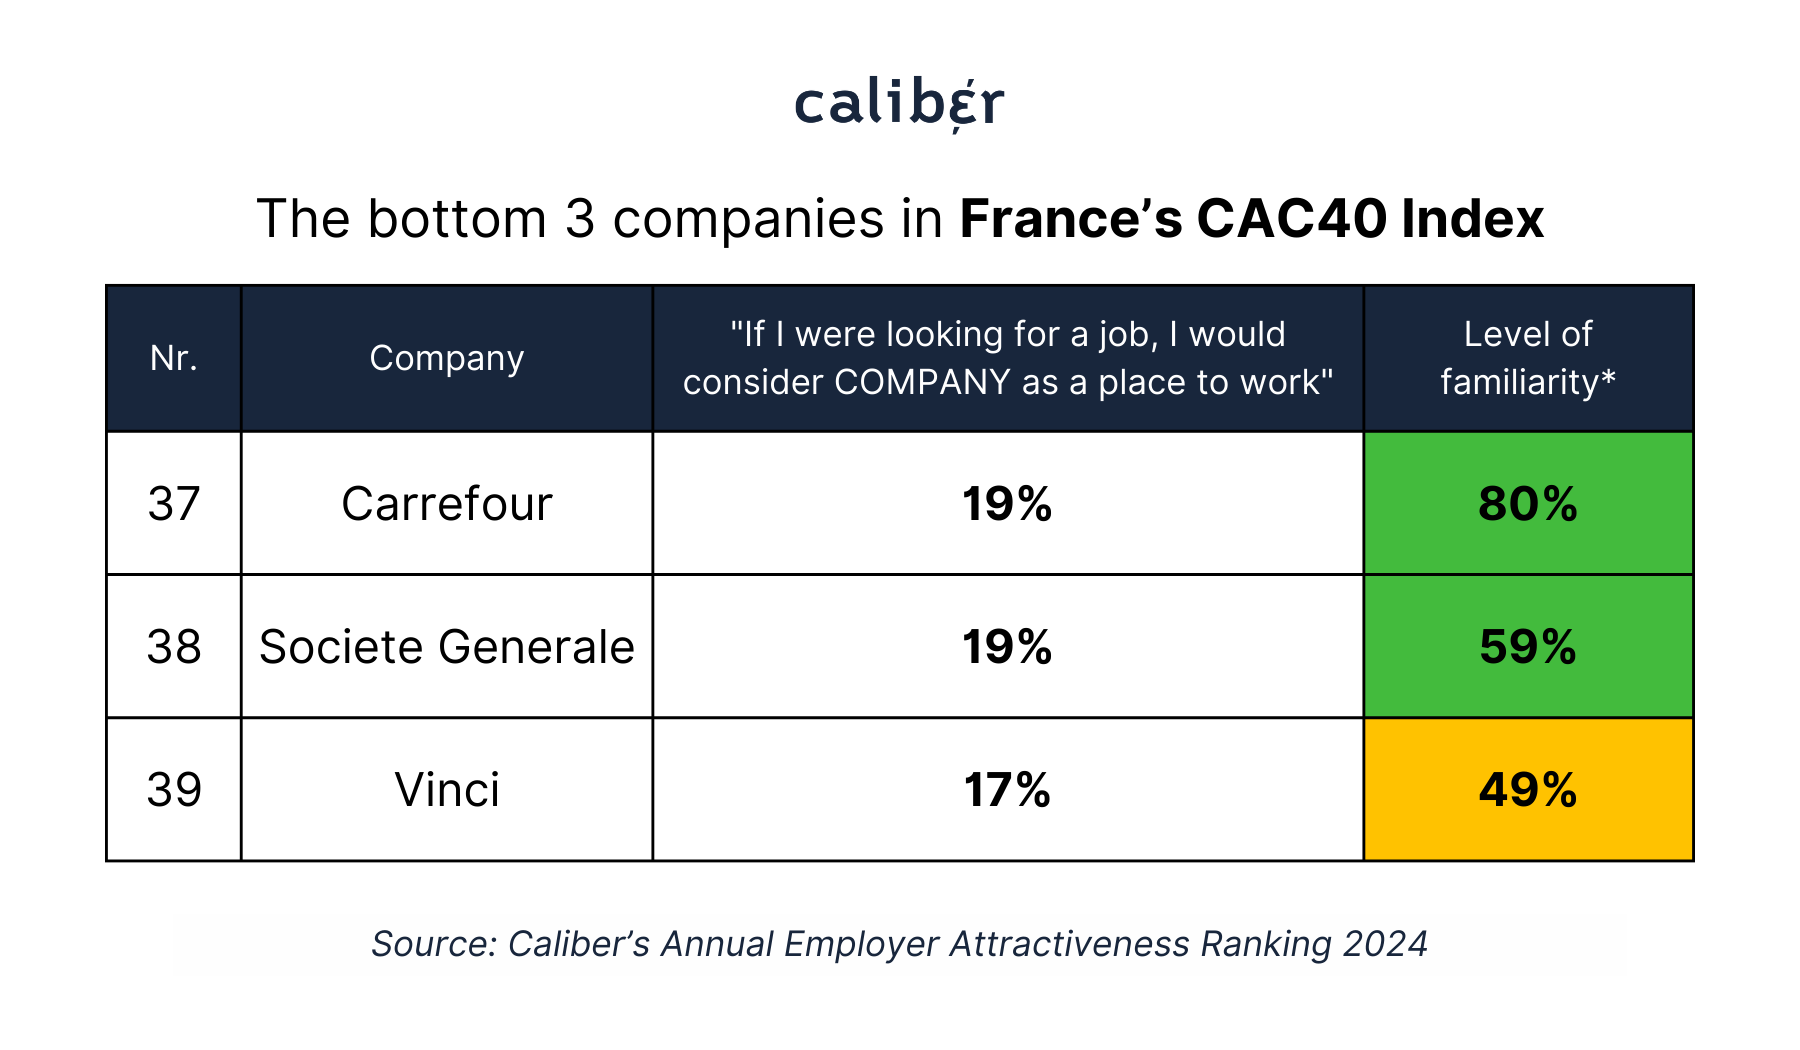 The bottom 3 companies in France CAC40